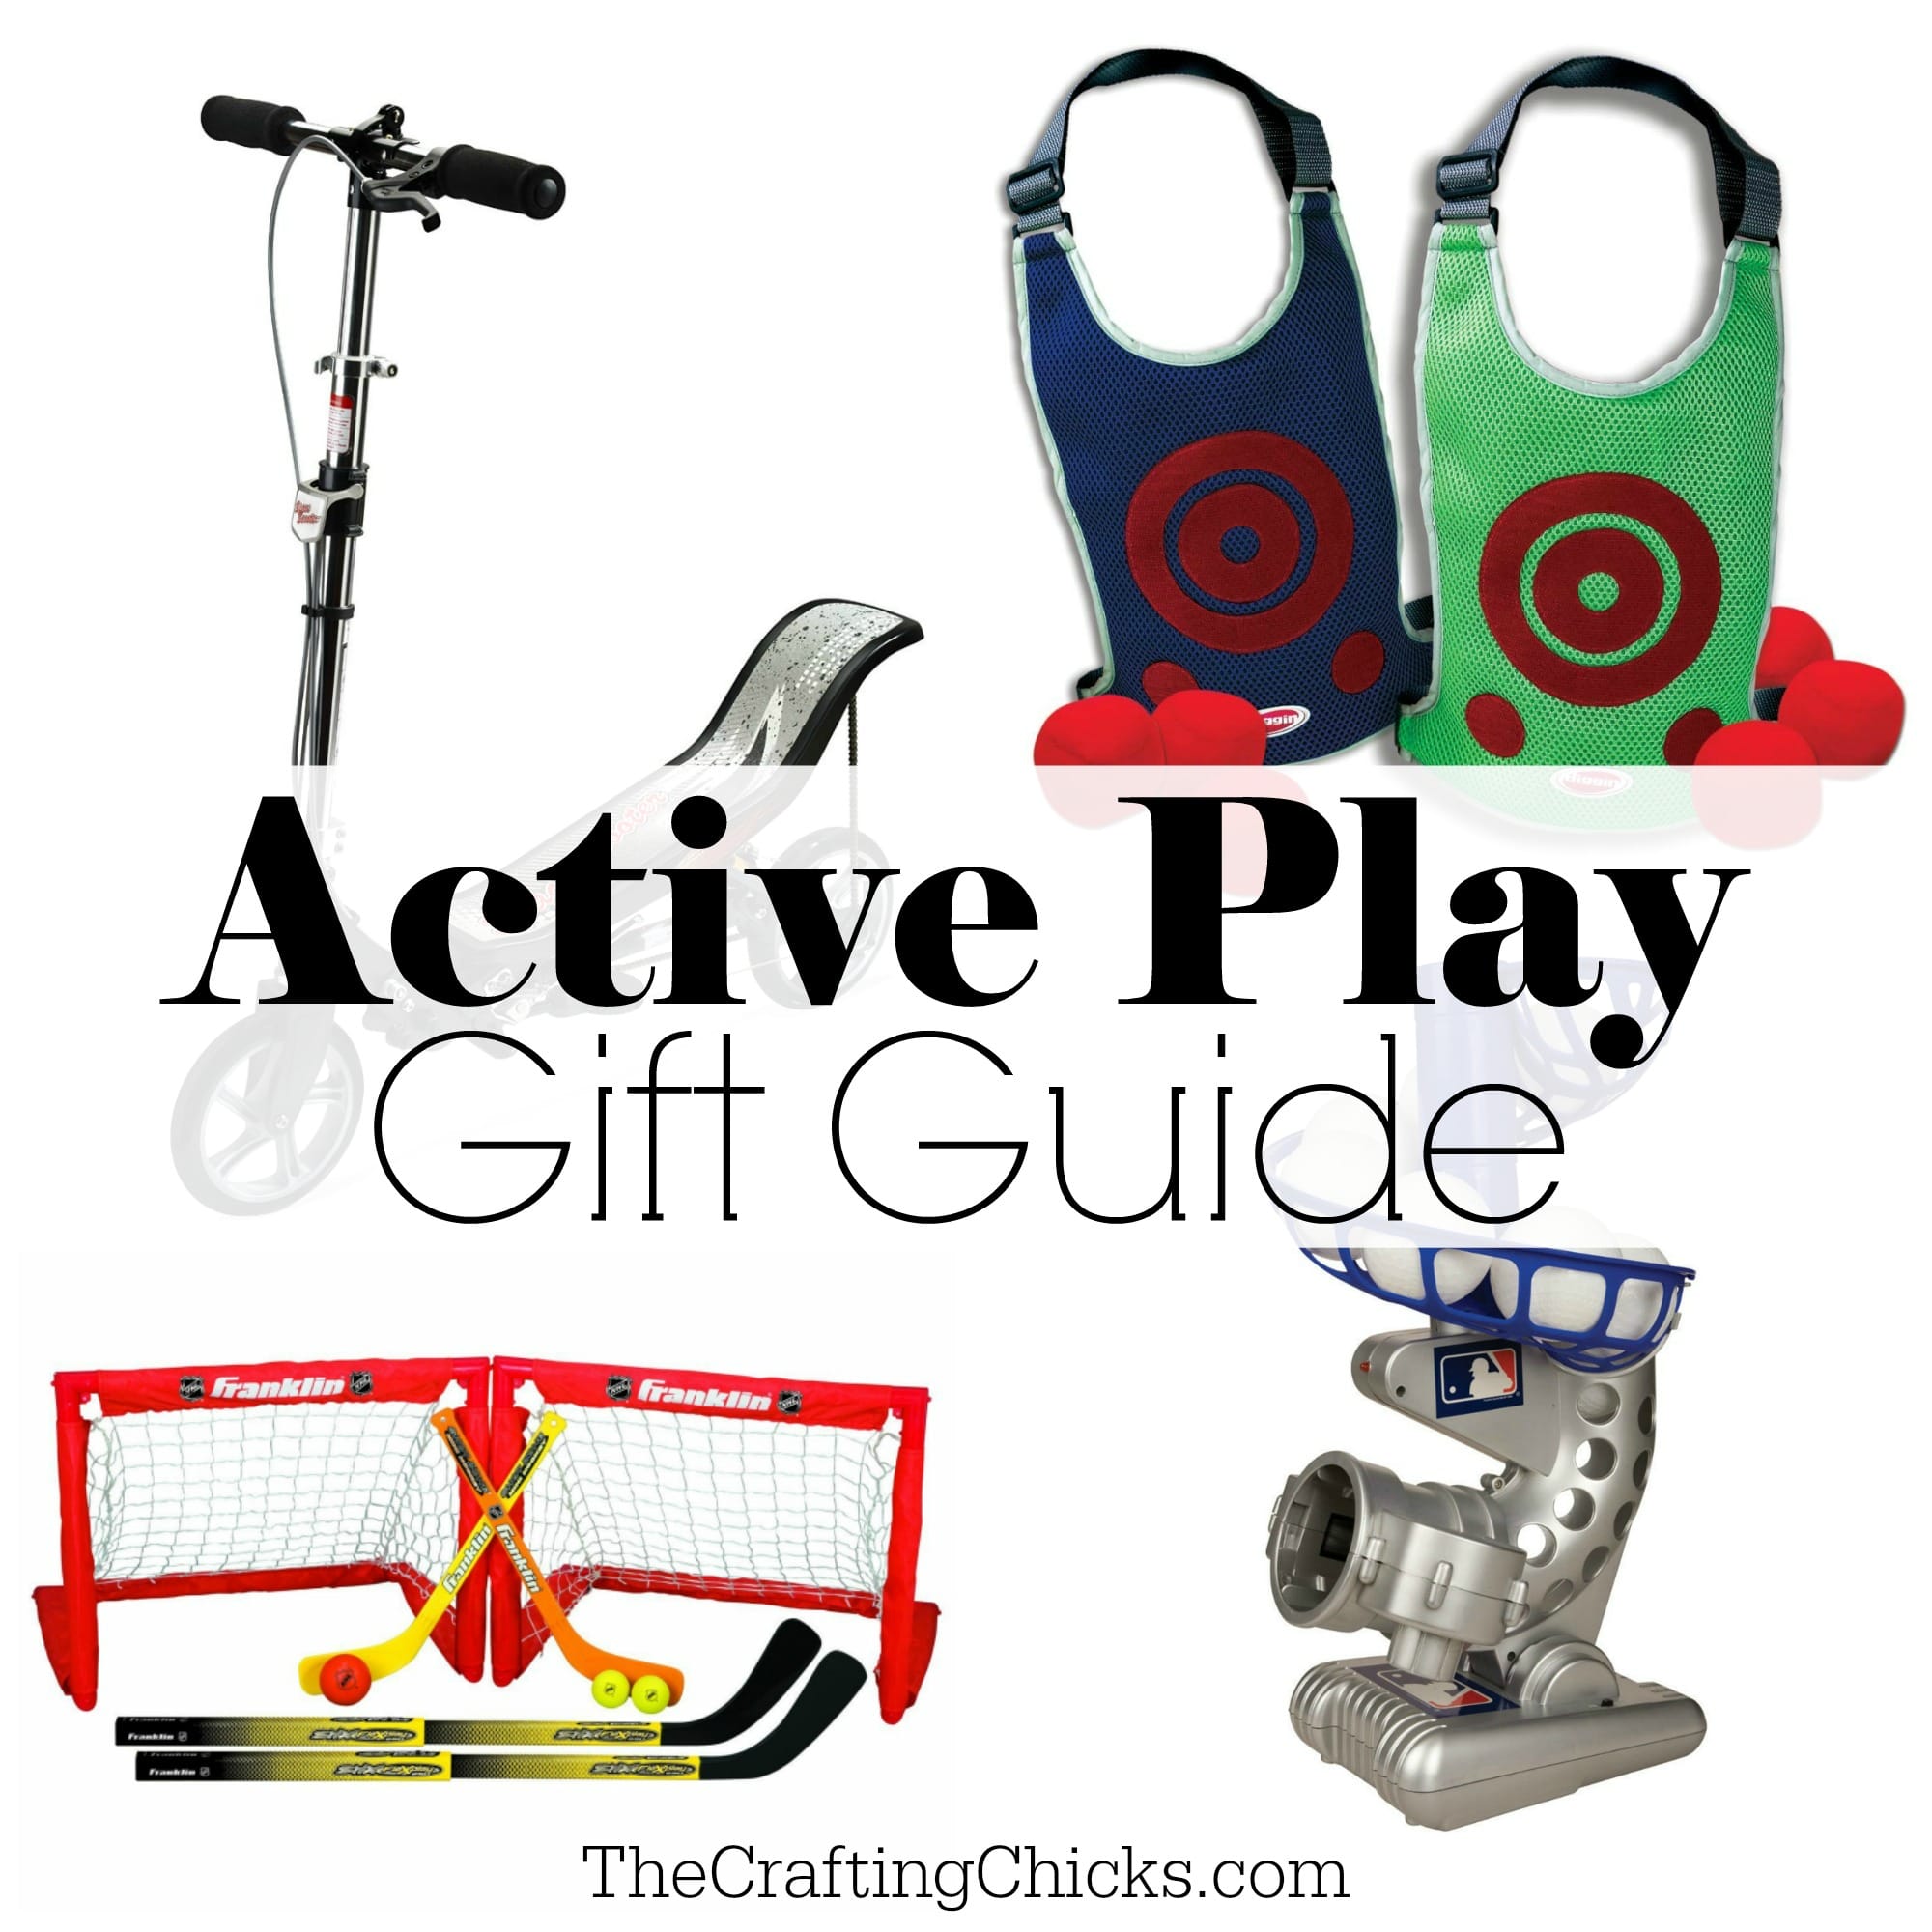 Active Play Gift Guide